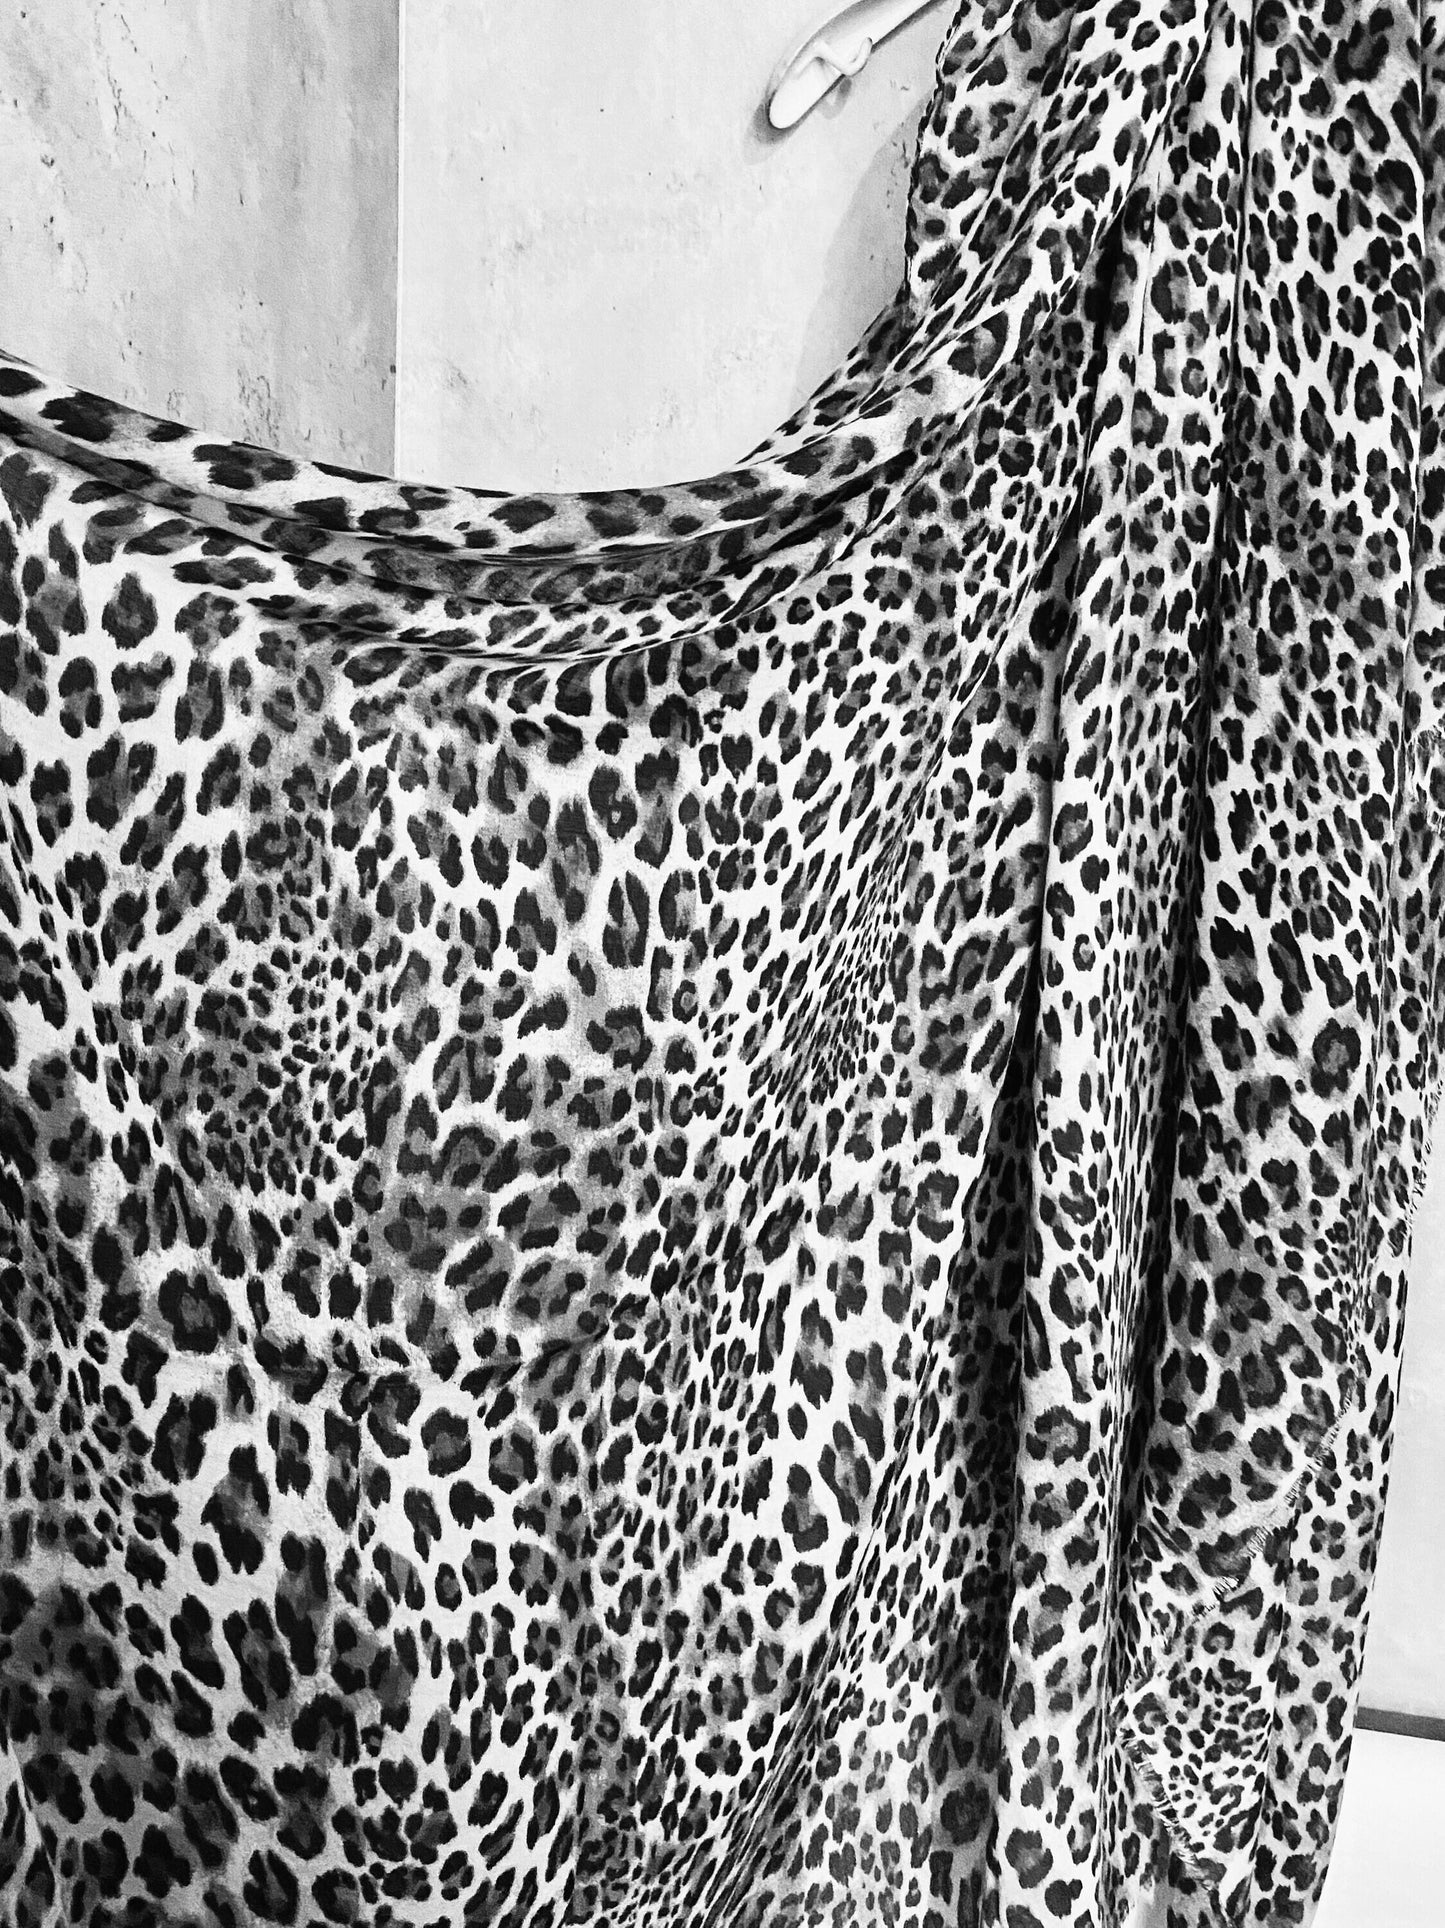 Classic Leopard Pattern Dark Grey Beige Scarf/Summer Autumn Scarf/Gifts For Mother/Scarf Women/UK Seller/Gifts For Her Birthday Christmas